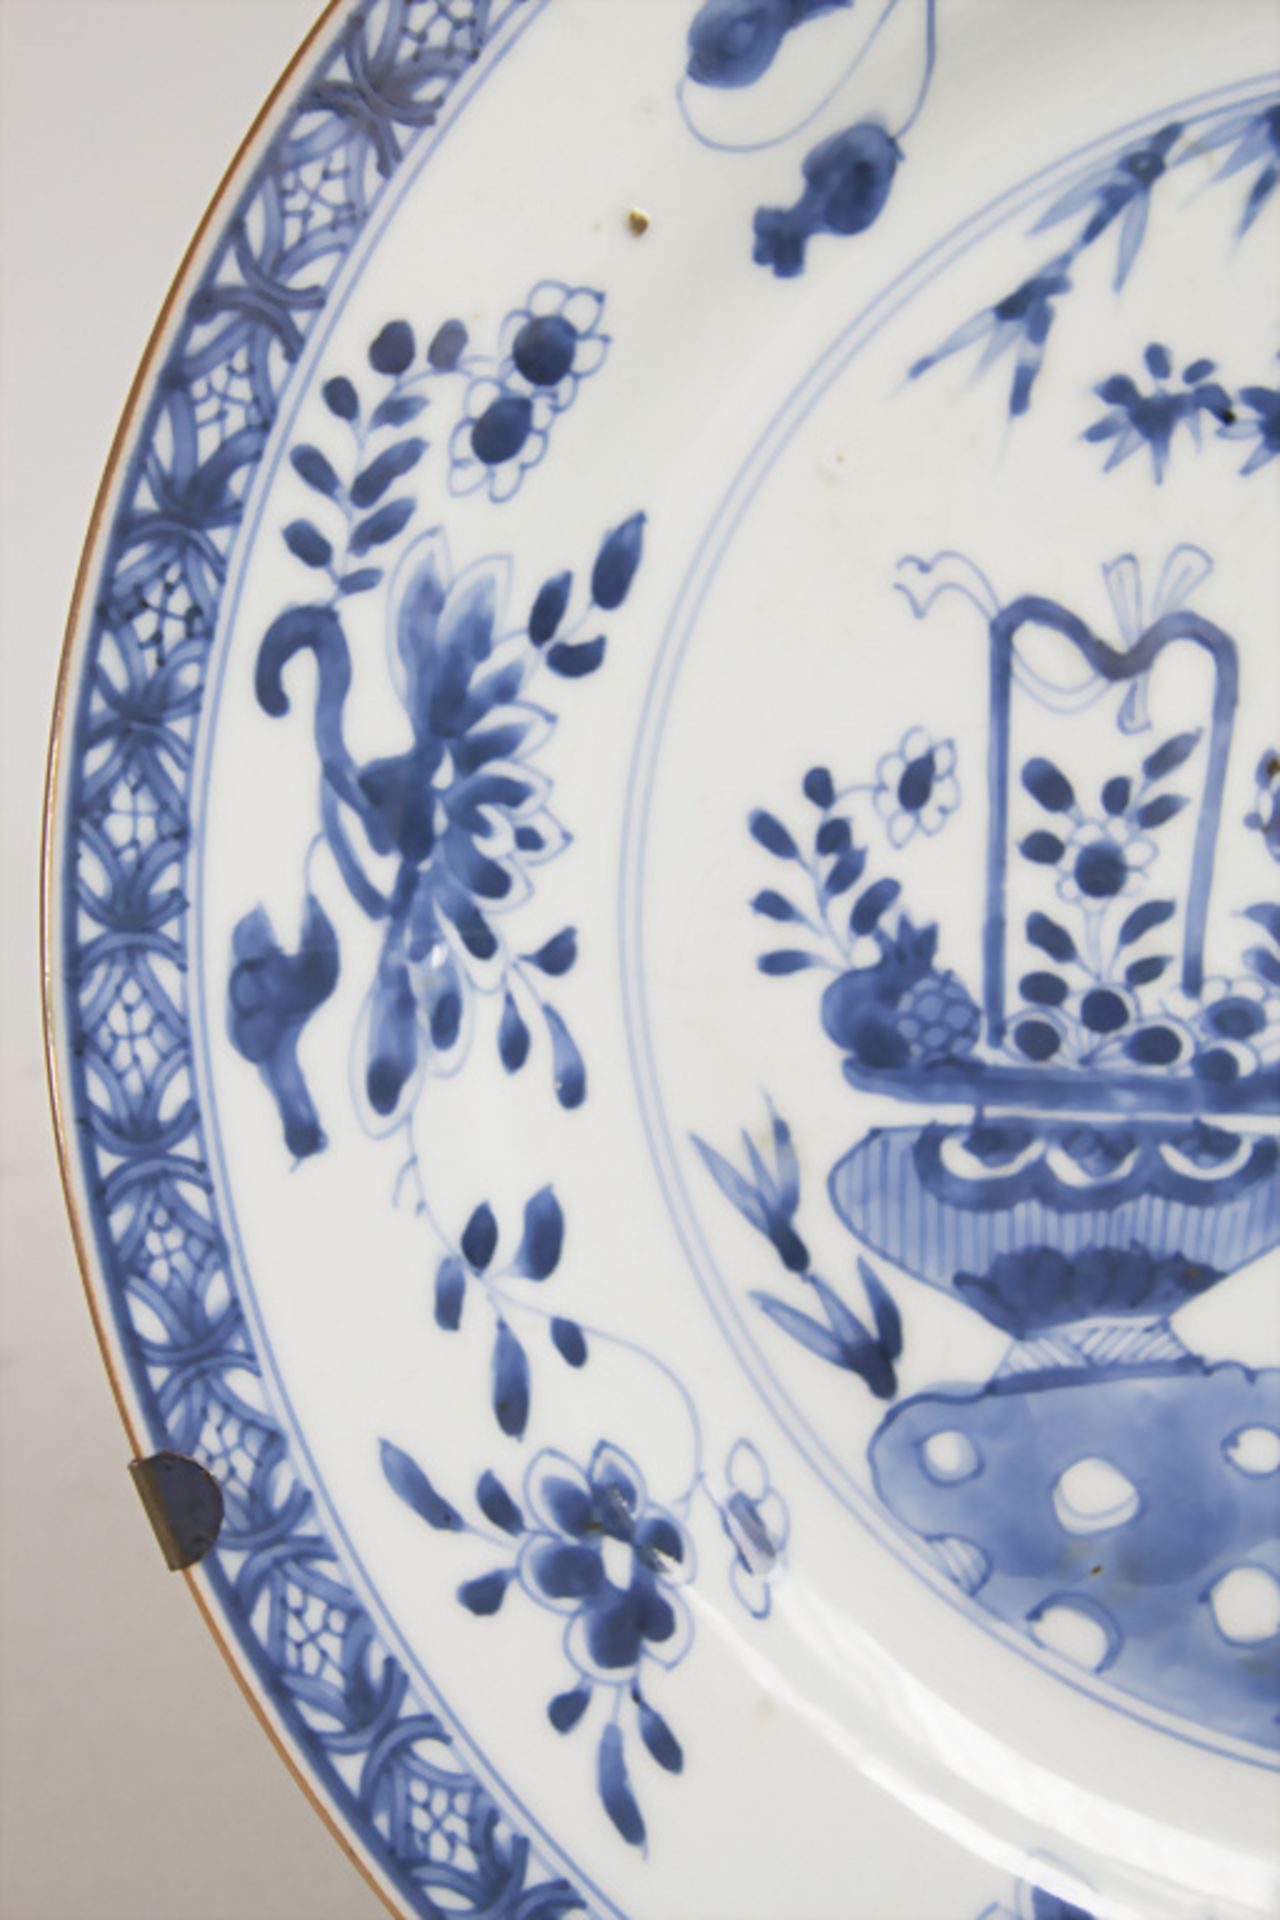 Teller / A plate, China, Qing Dynastie (1644-1911), 18. Jh. - Image 2 of 3